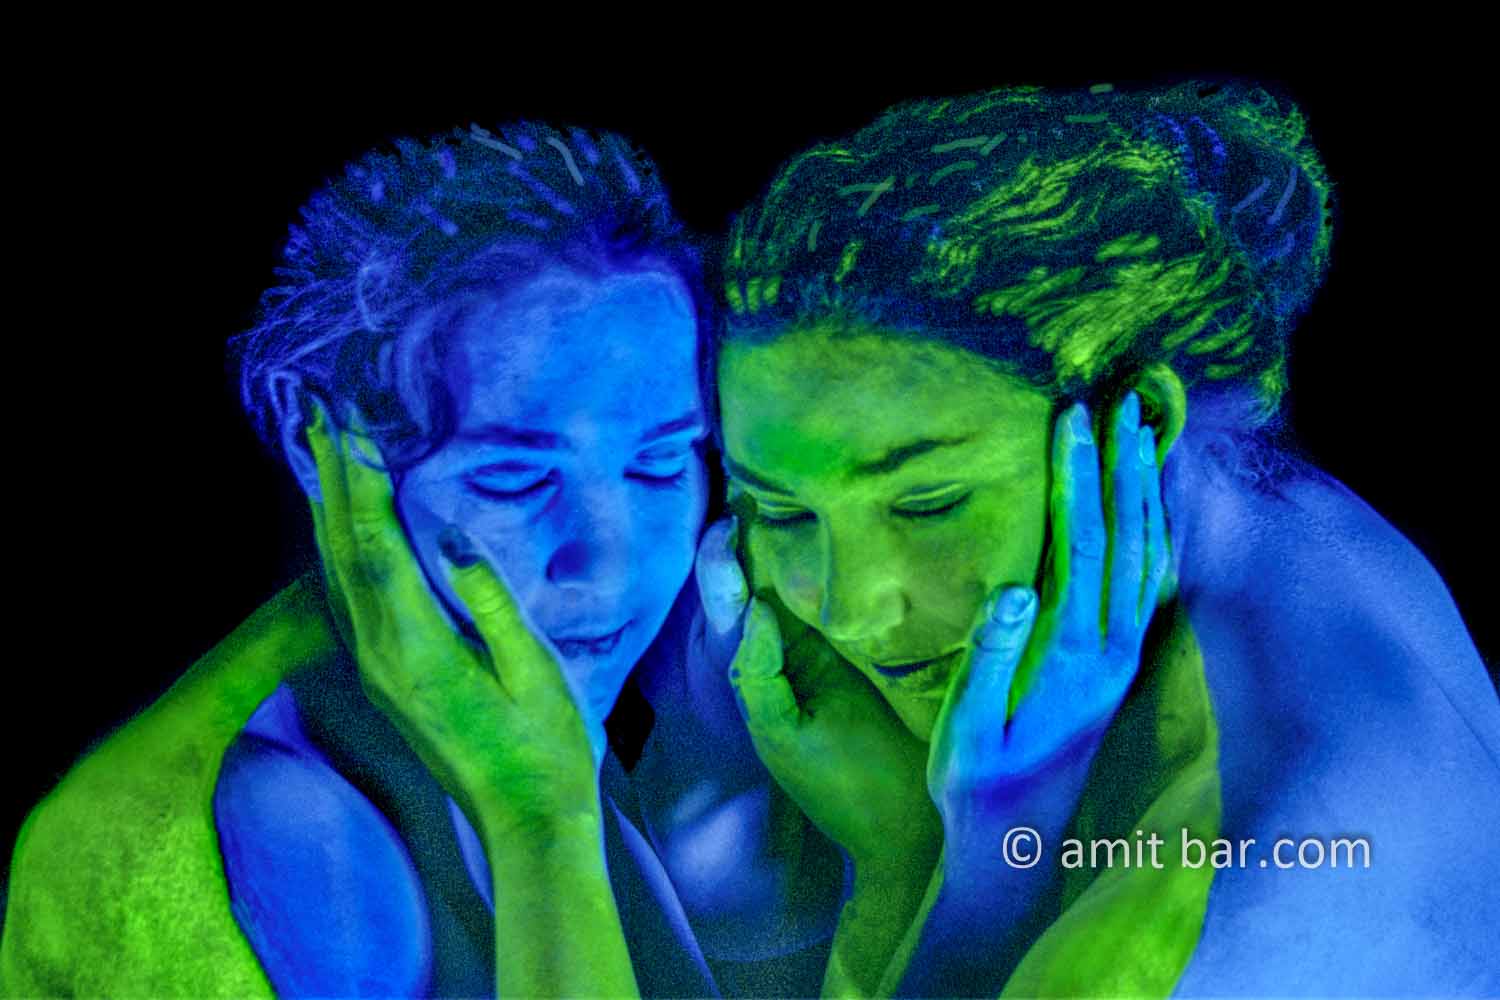 Blue and green I: Two body-painted models in UV blue and green